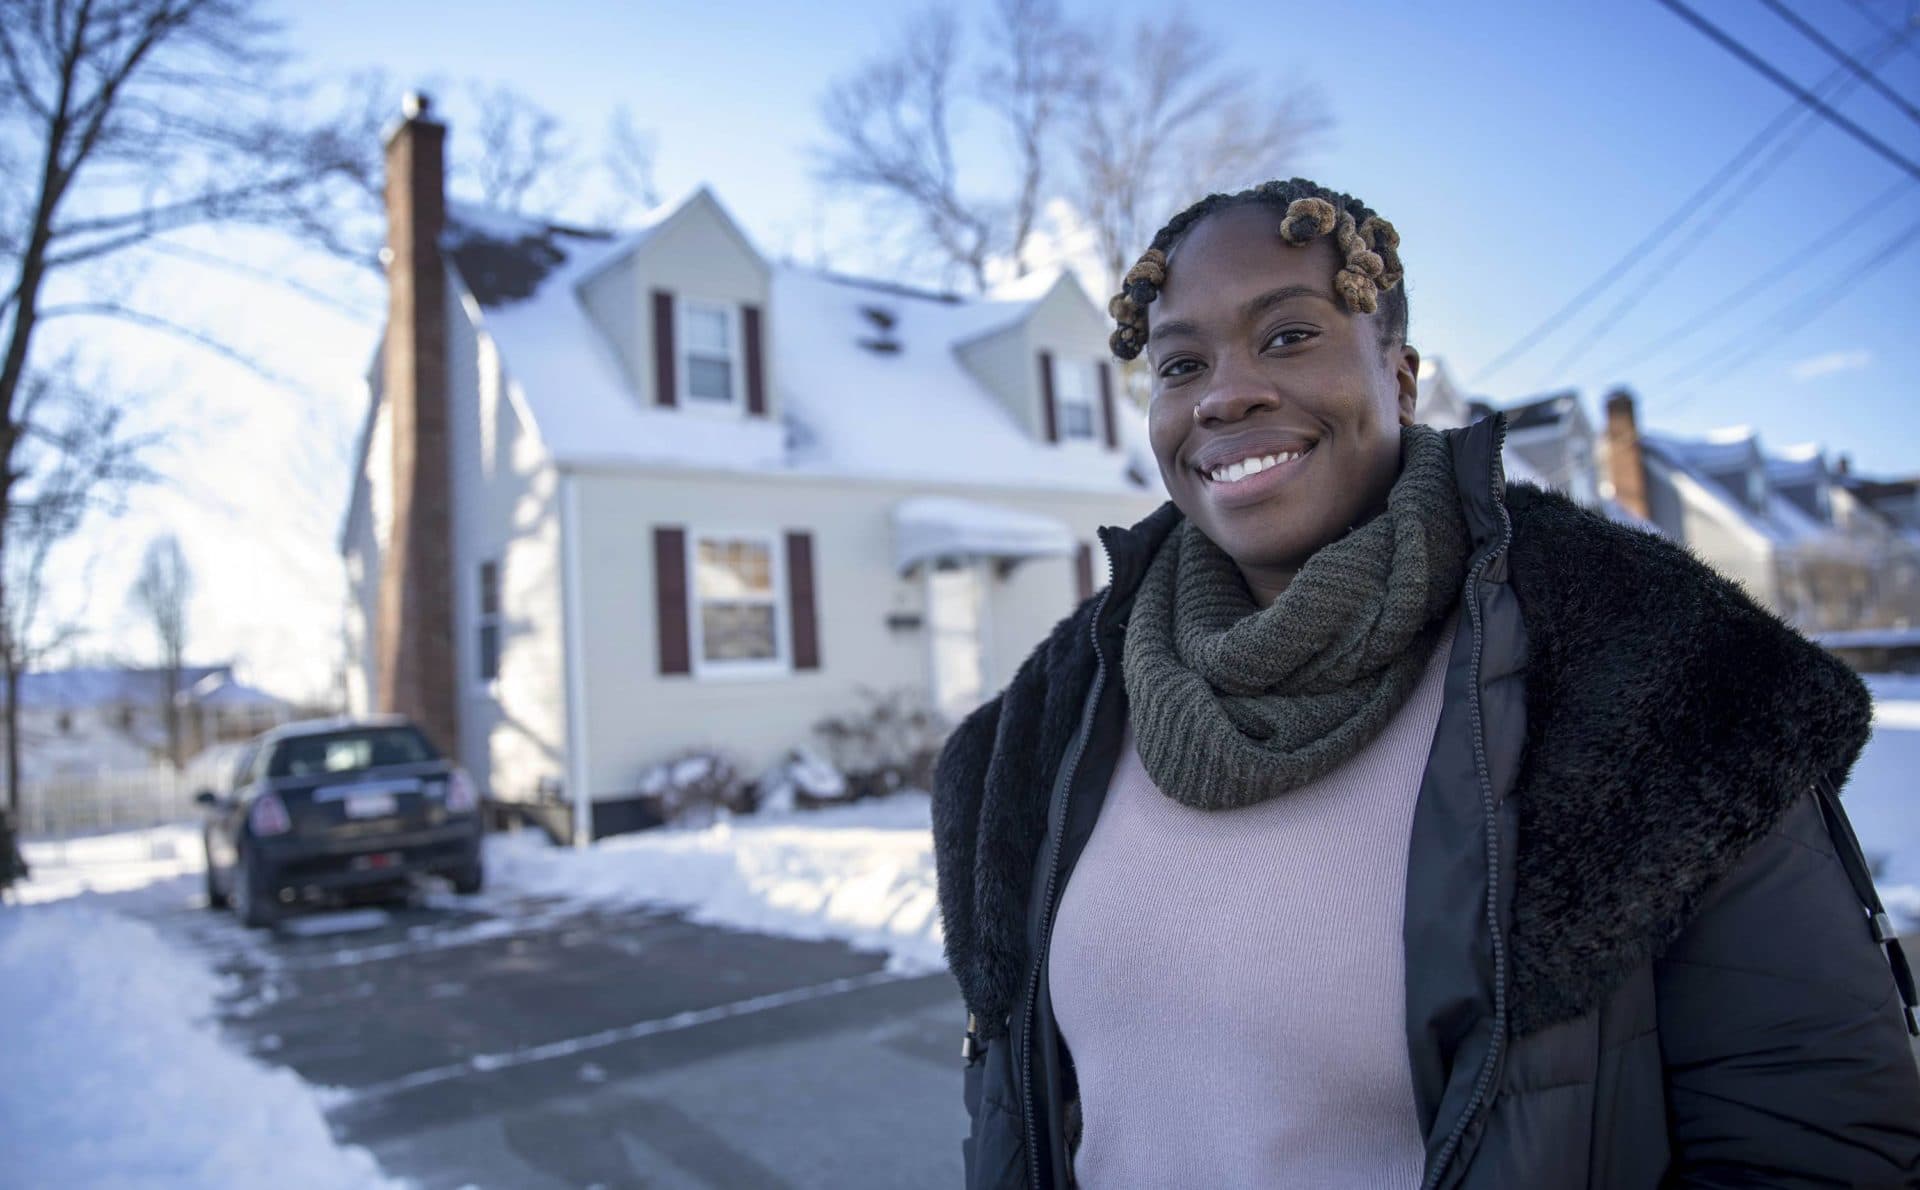 Sabrina Xavier wanted to purchase a home in Boston, but ended up buying this house in Brockton. (Robin Lubbock/WBUR)